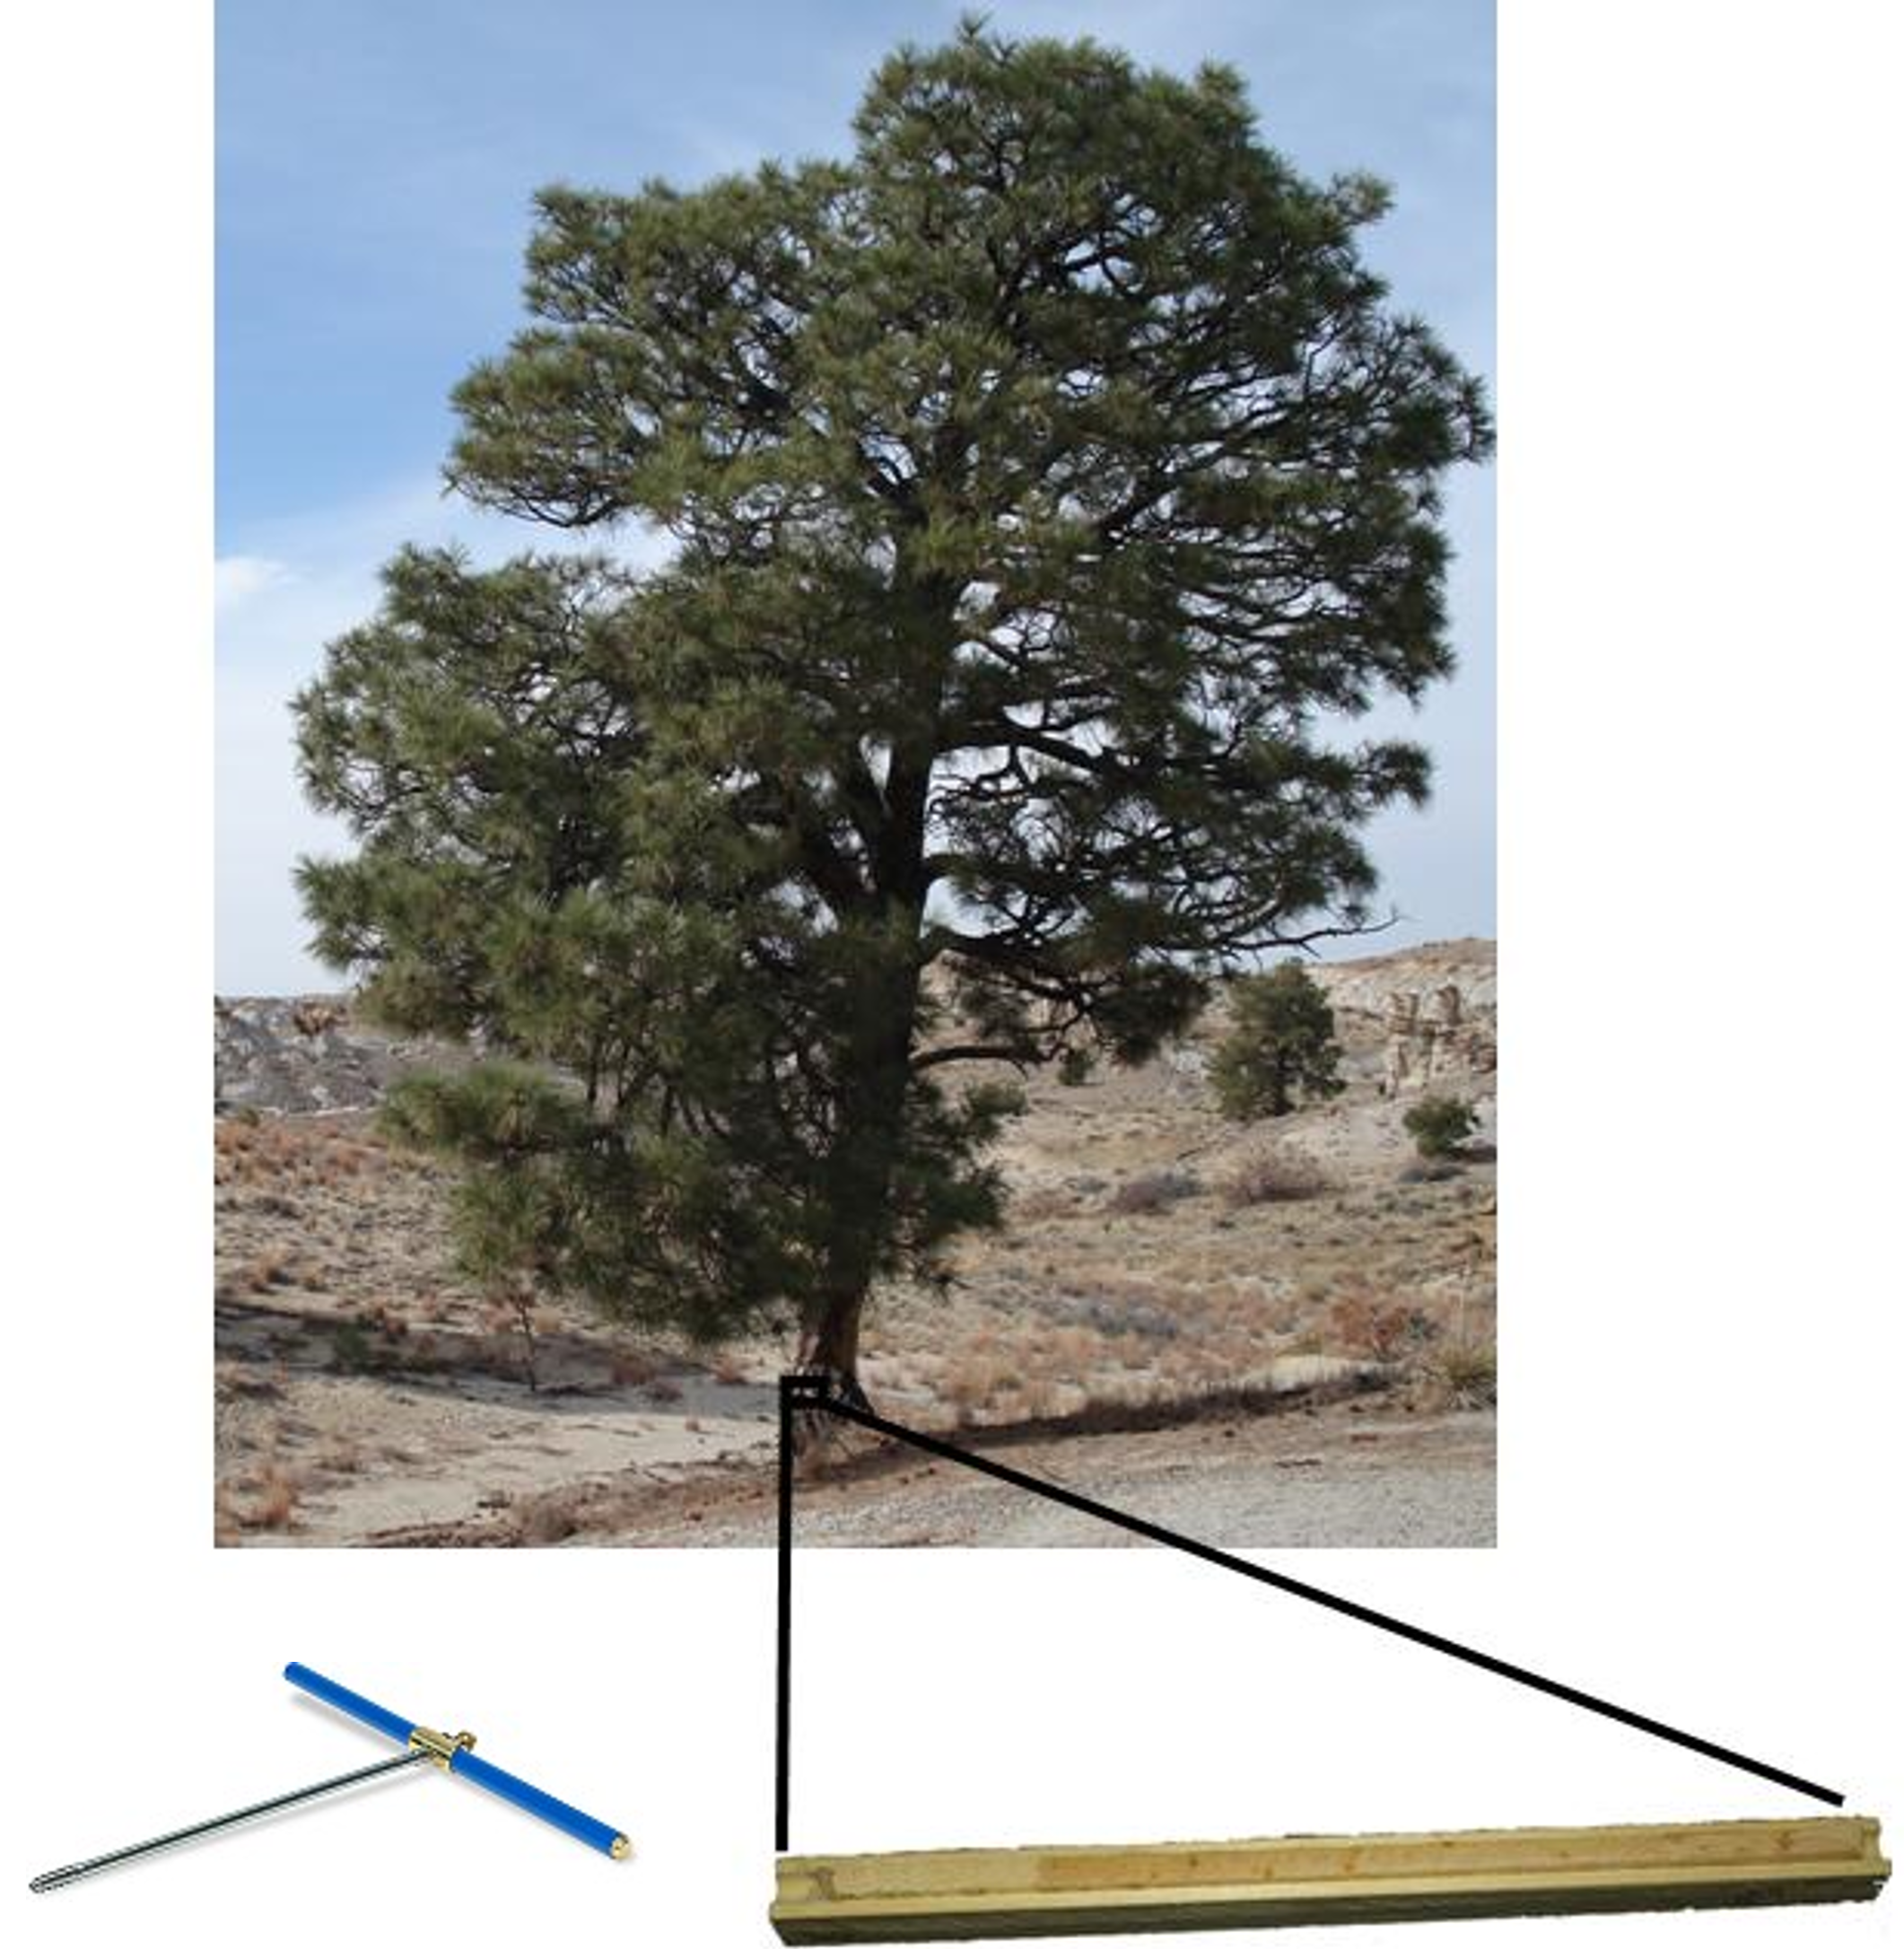 A picture of a tree, an increment borer used to extract a tree core, and a core.